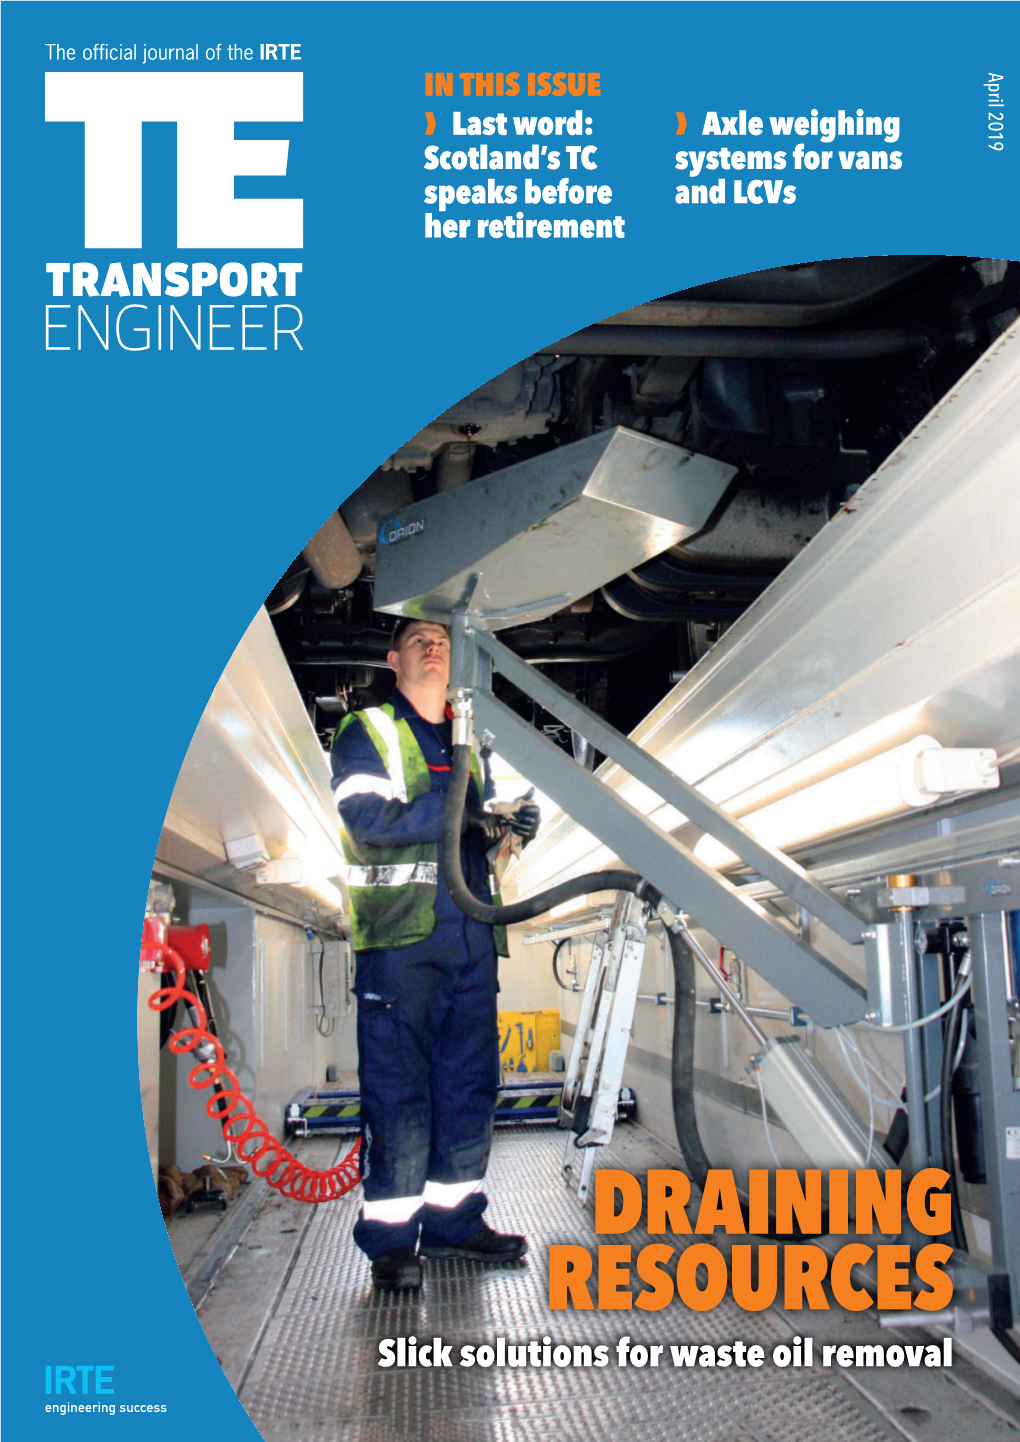 Transport Engineer Is the Official Journal of the IRTE, System and Its Urea Tank As Well